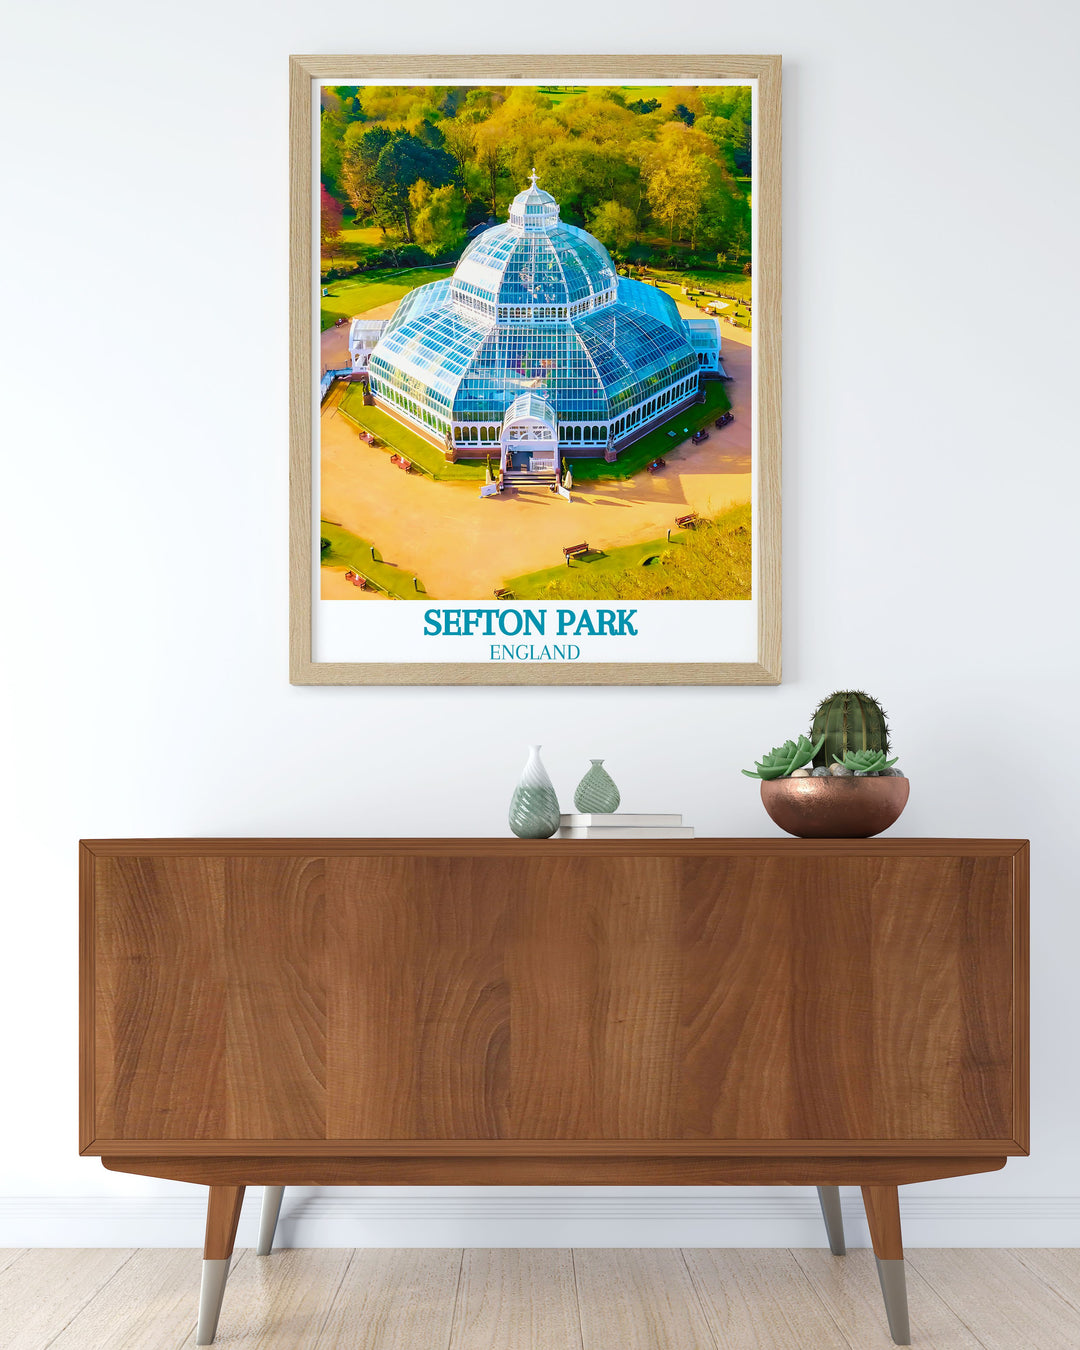 Stunning wall art print gift featuring Liverpools Sefton Palm House and the iconic Liver Building. This piece blends historical architecture with vibrant cityscapes making it a unique addition to your home decor.